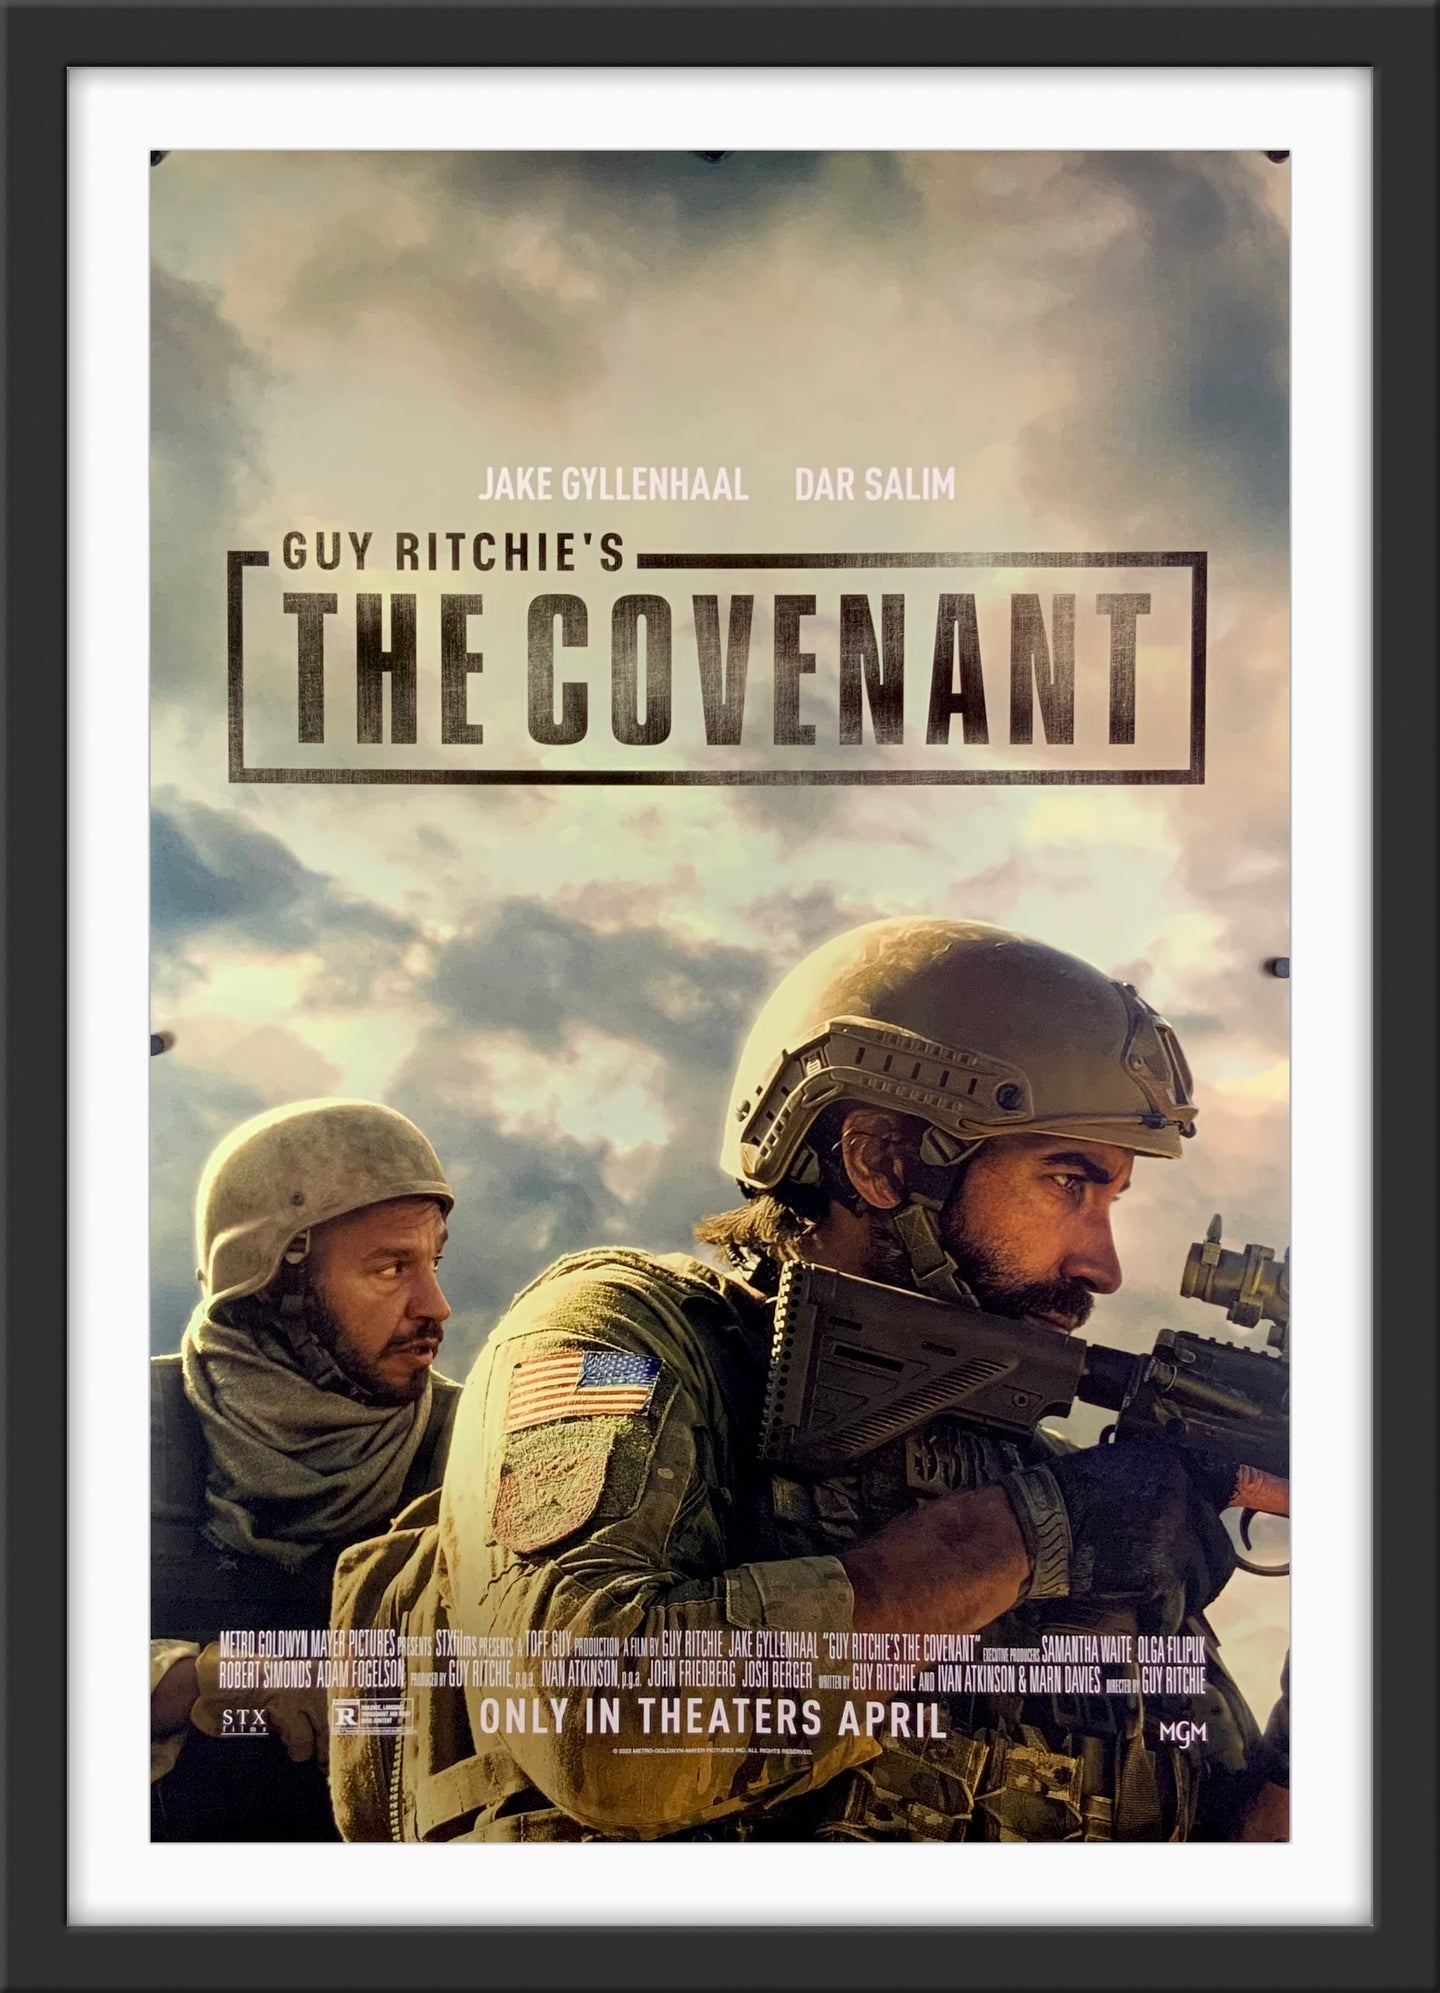 An original movie poster for the Guy Ritchie film The Covenant